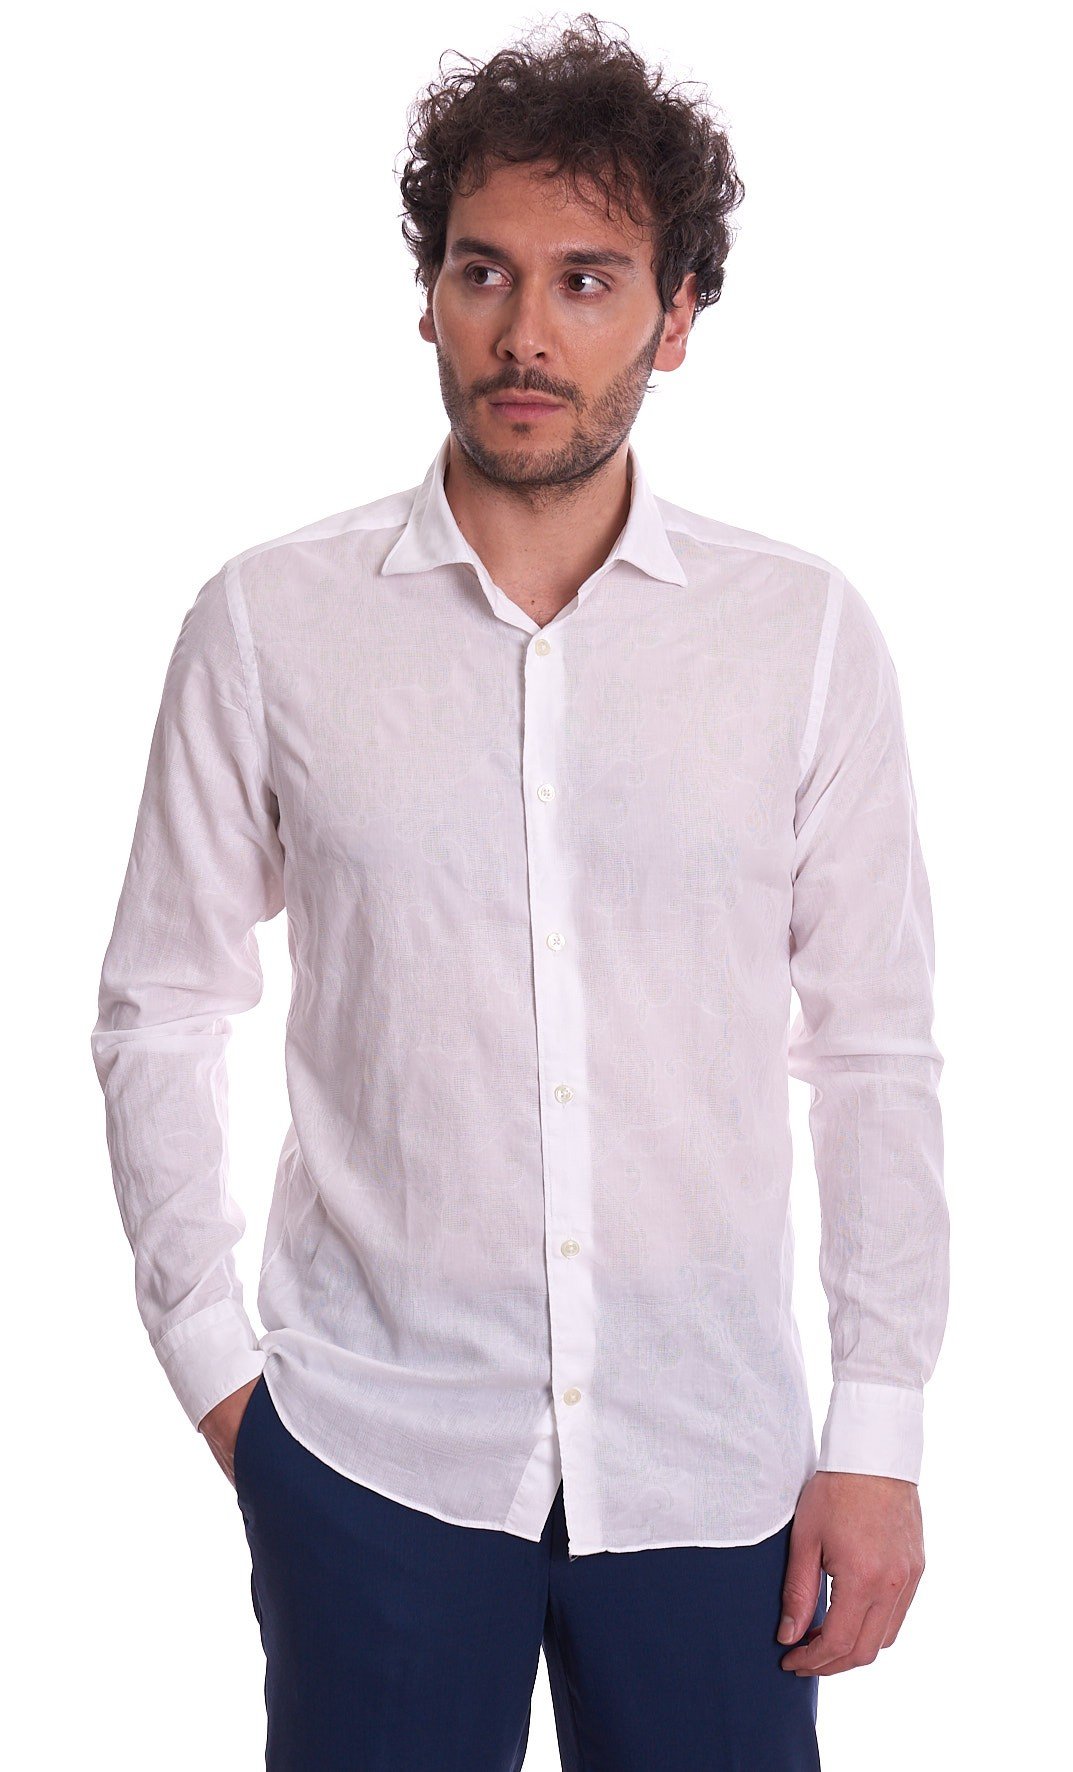 Men's embroidered shirt Mastricamiciai slim fit FS049-OR150